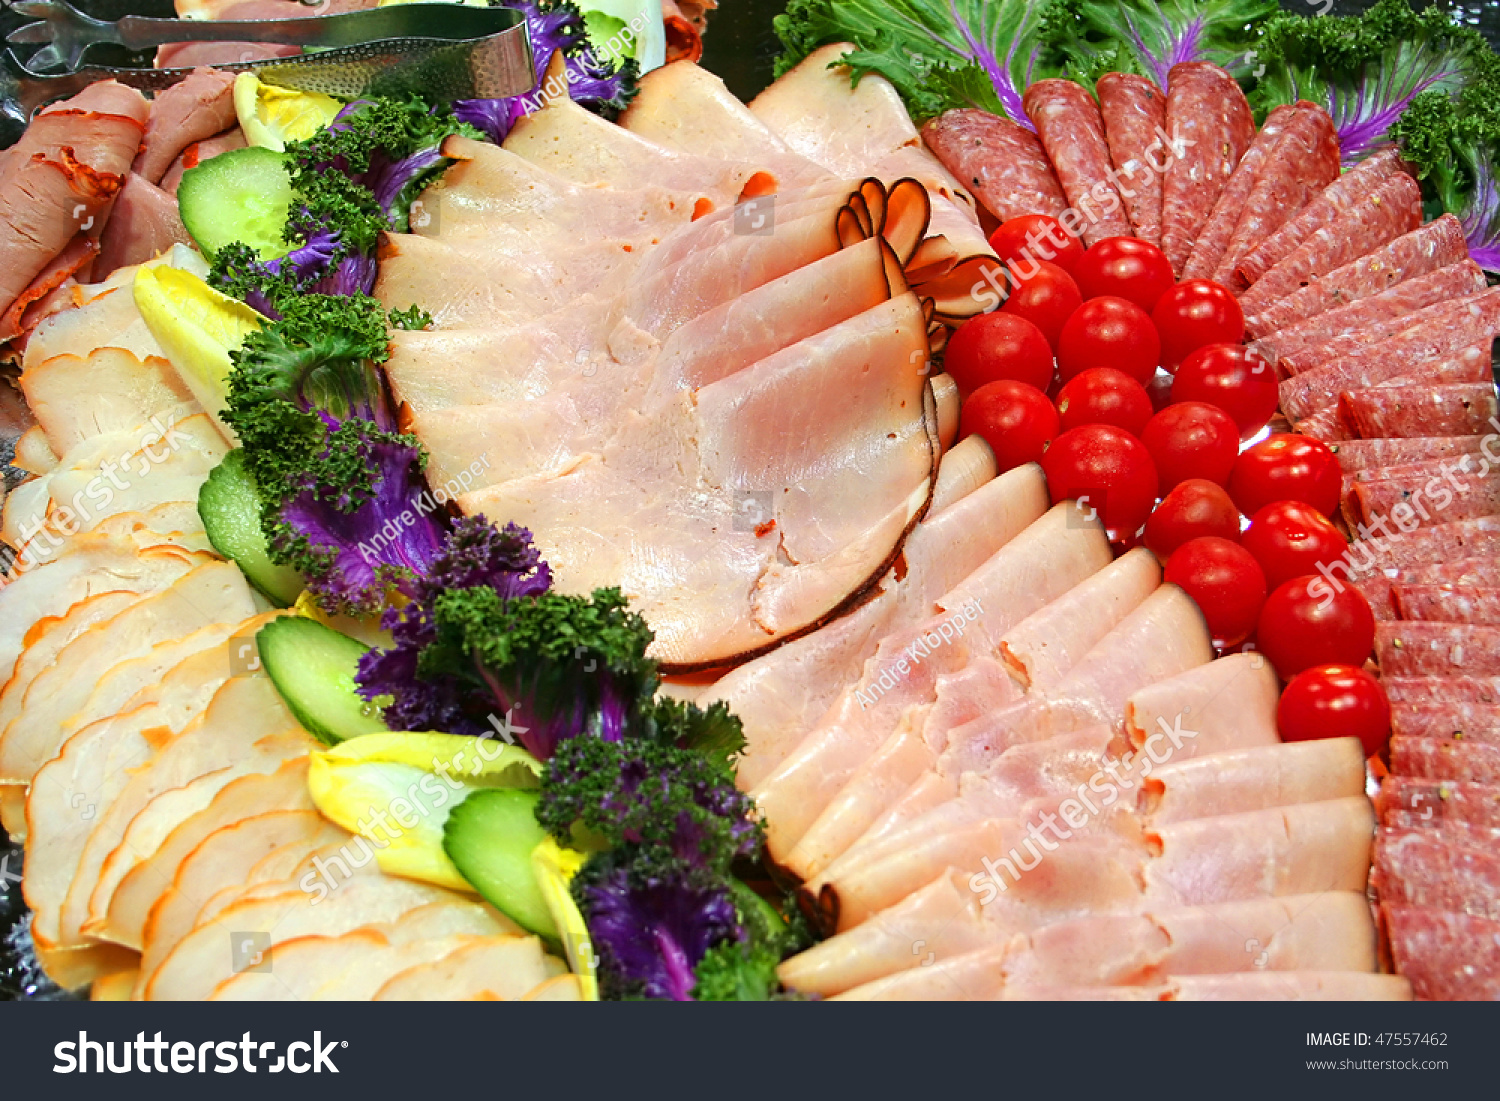 Assorted Cold Meats On A Plate Stock Photo 47557462 Shutterstock